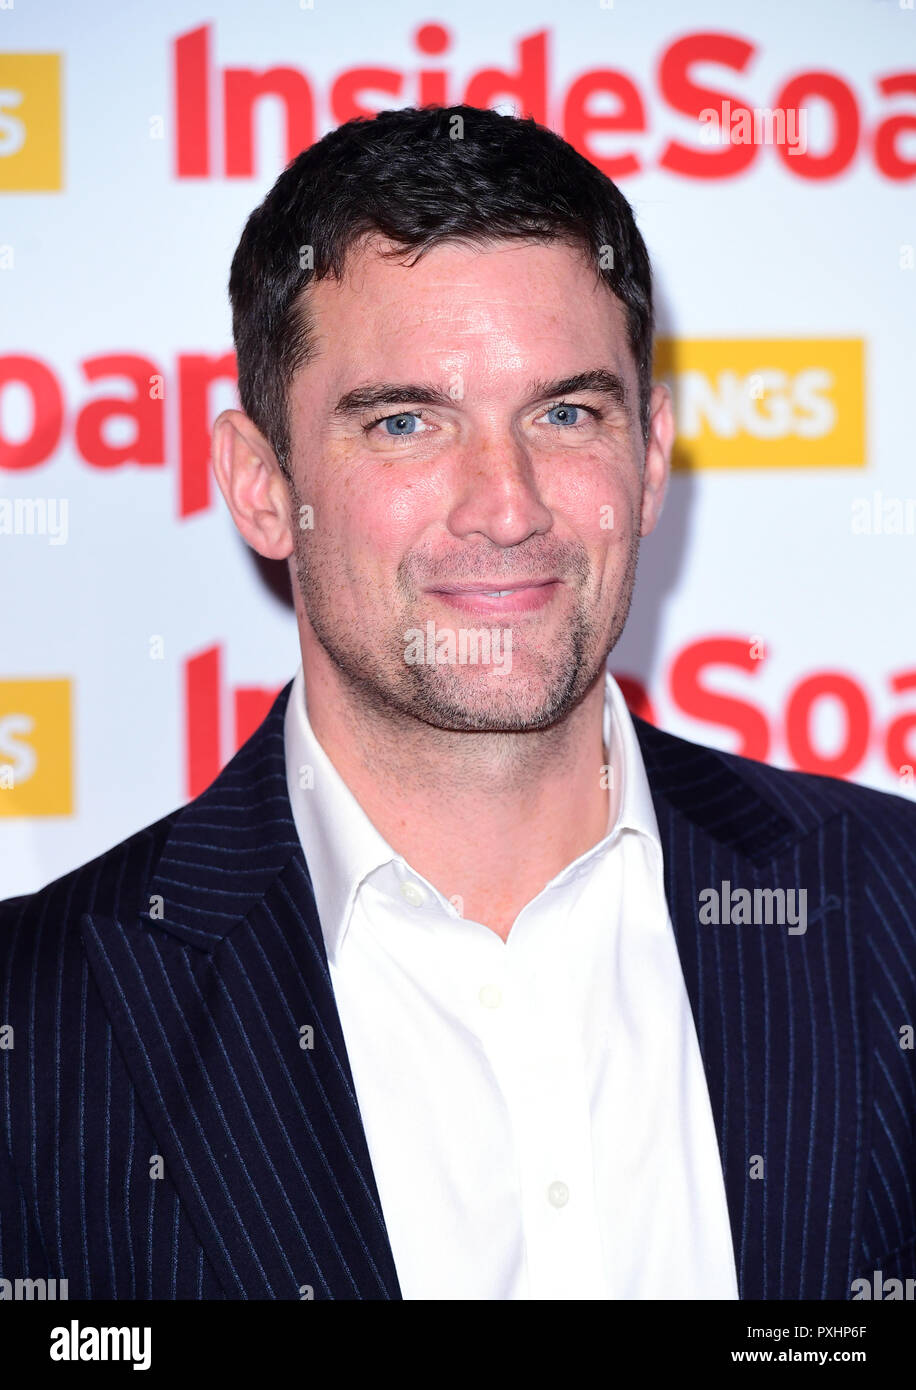 Matthew Chambers attending the Inside Soap Awards 2018 held at 100 ...